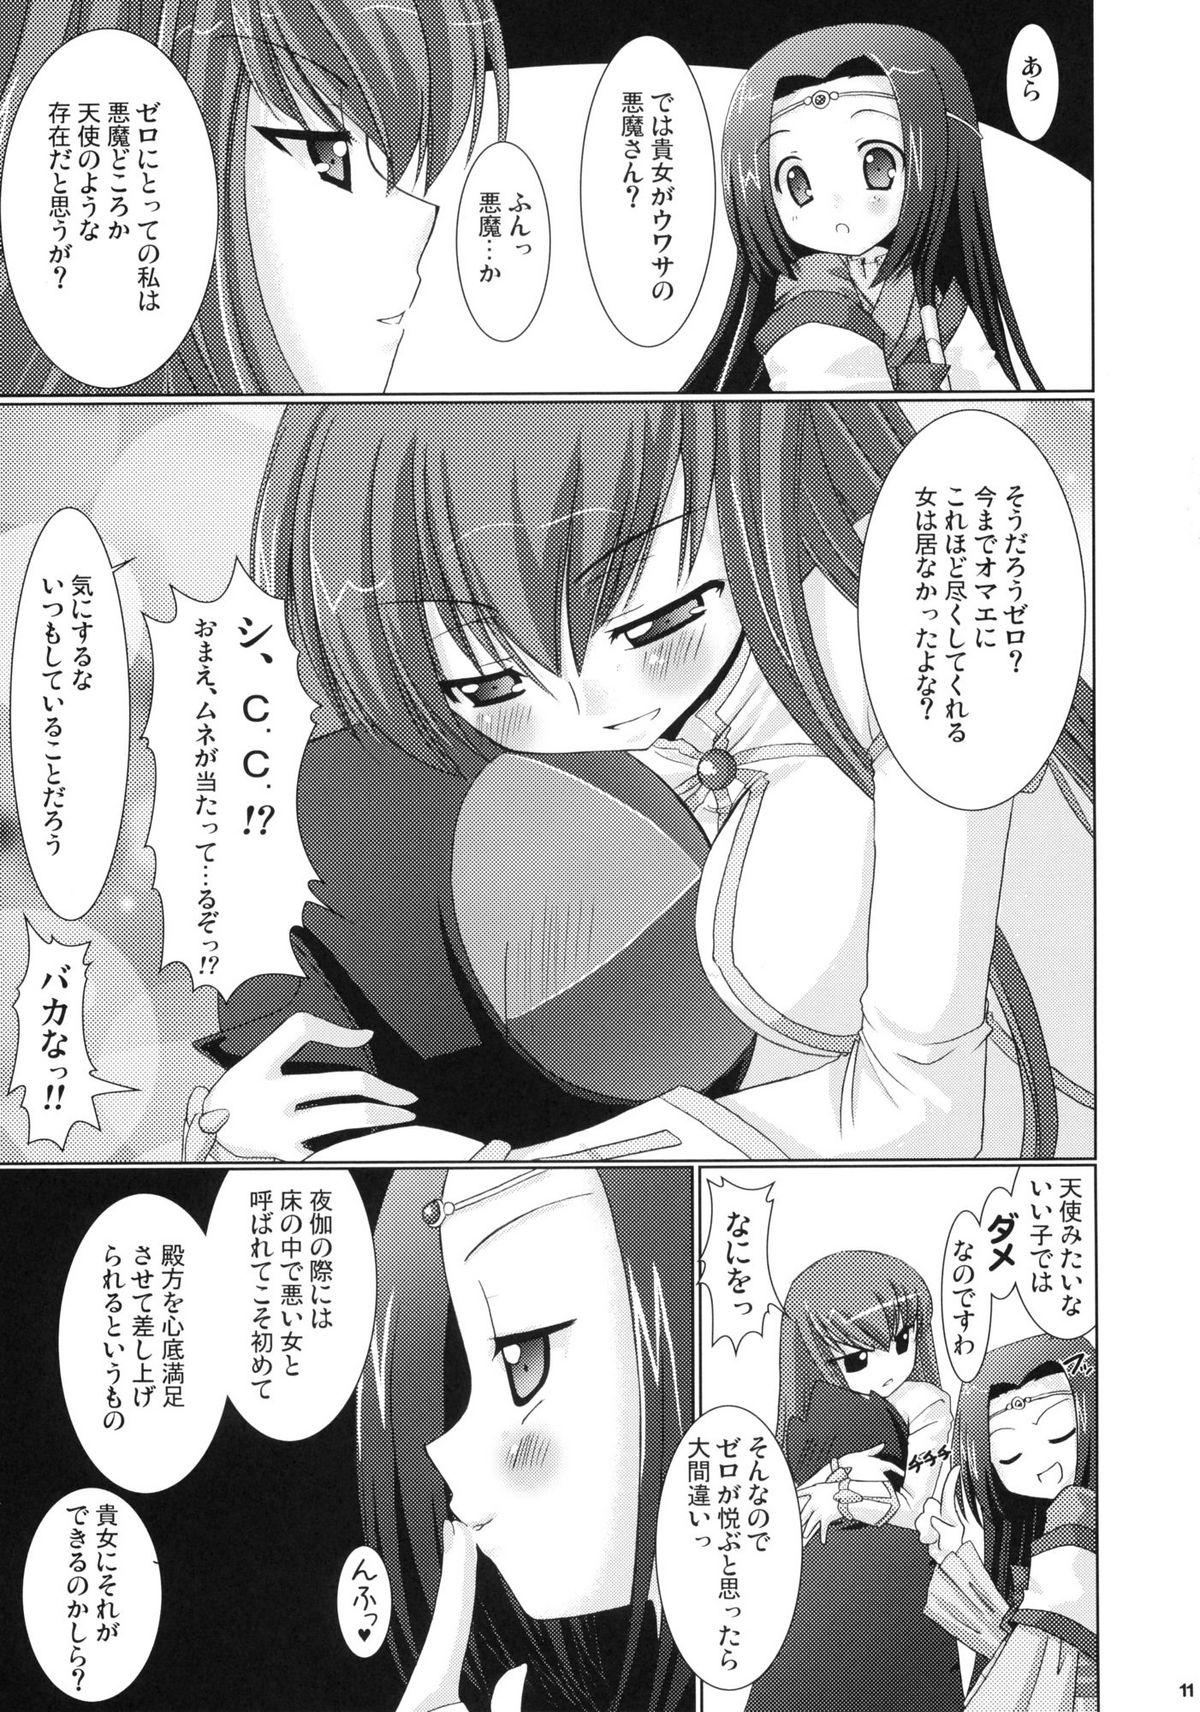 Babes Kouhime Kyouhime - Code geass Publico - Page 11